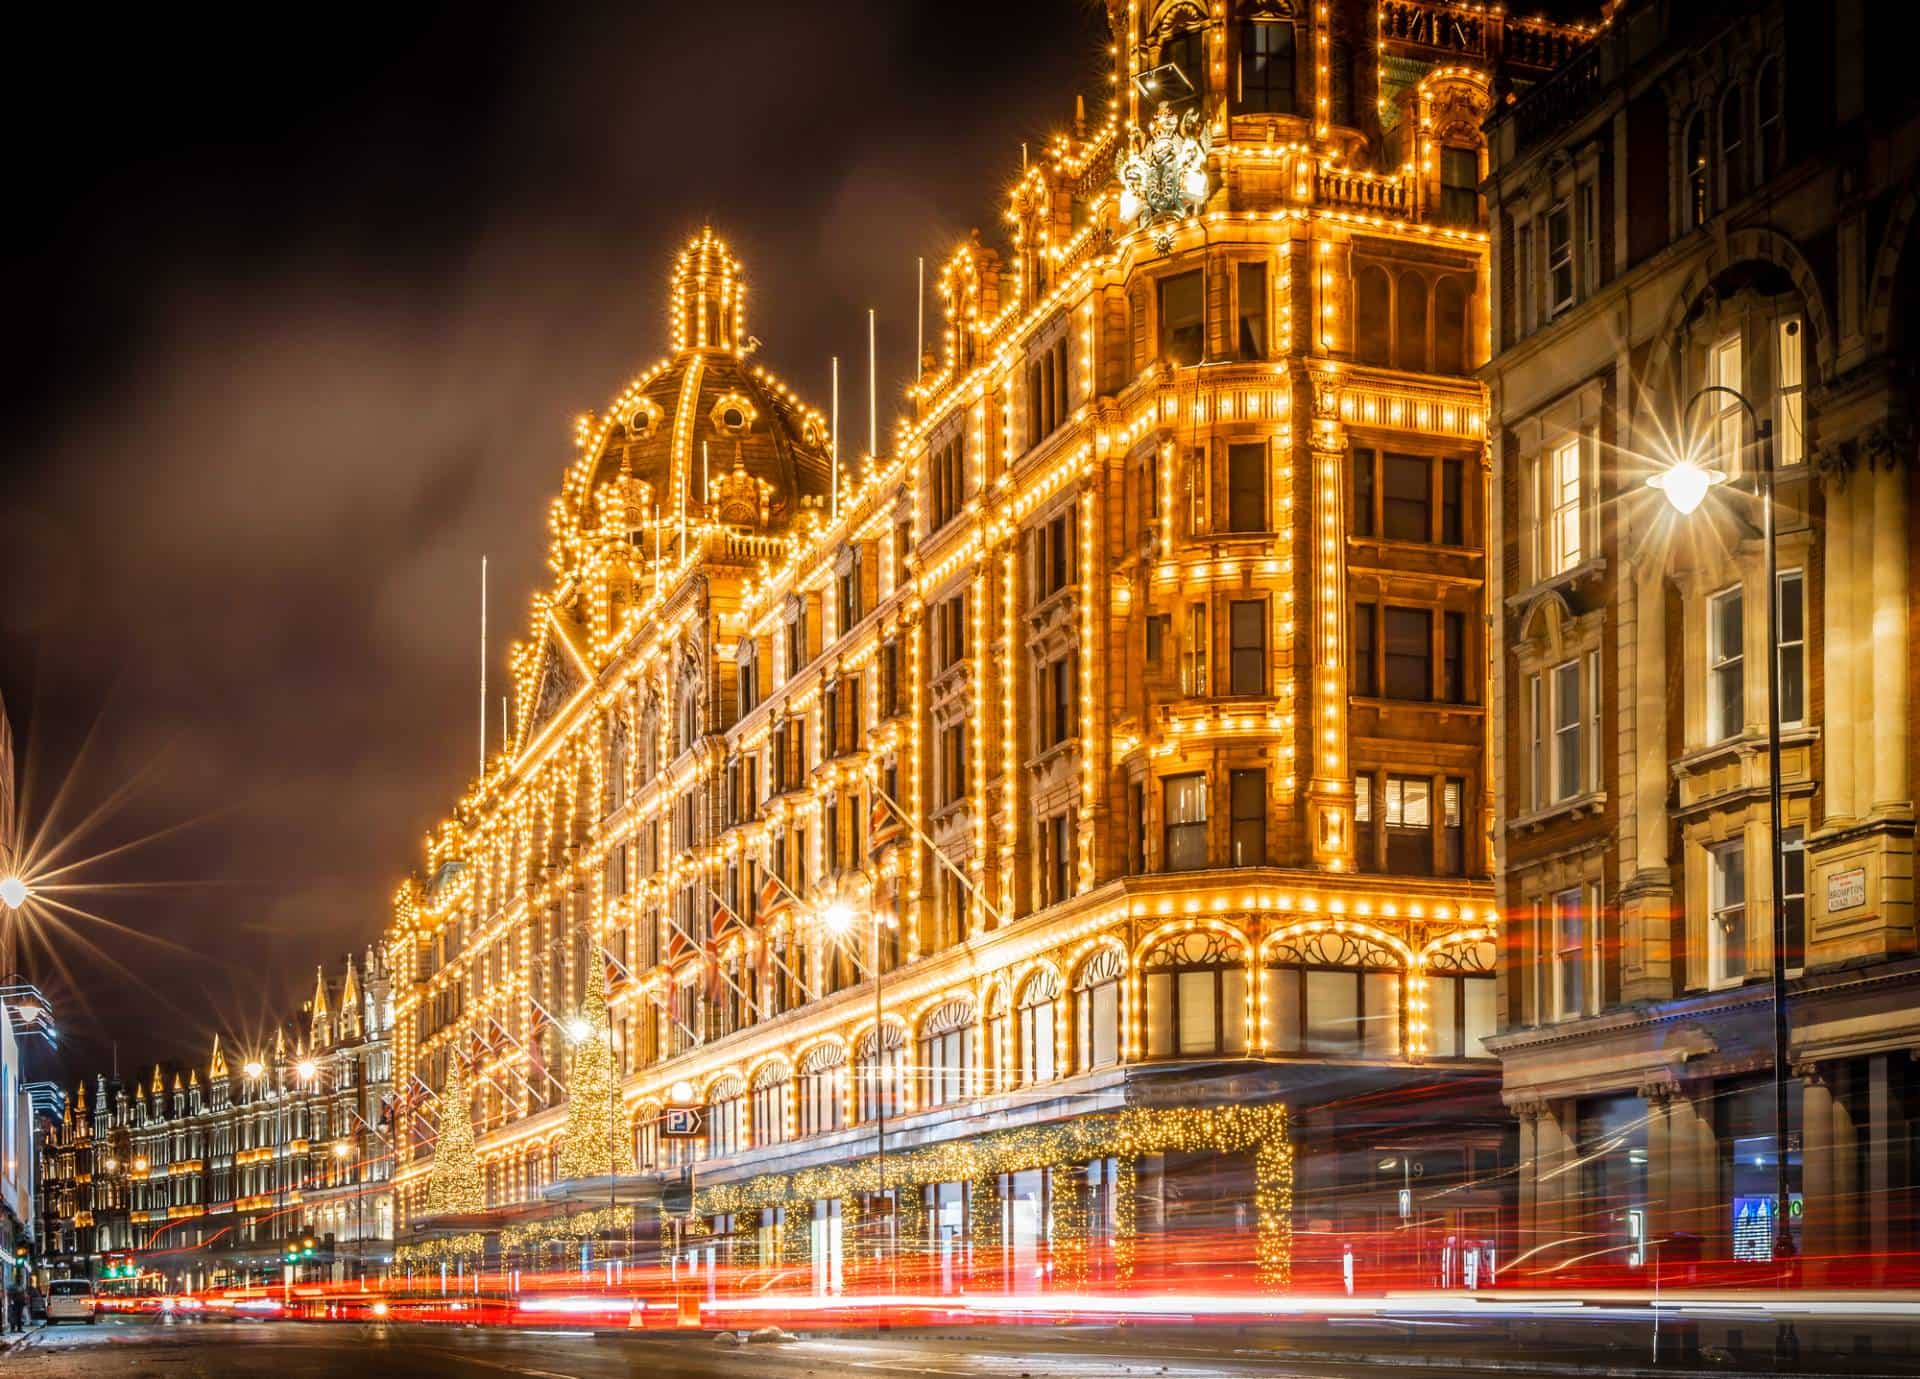 Night traffic in front of Harrods bathed in lights - London’s most famous and iconic luxury department store.